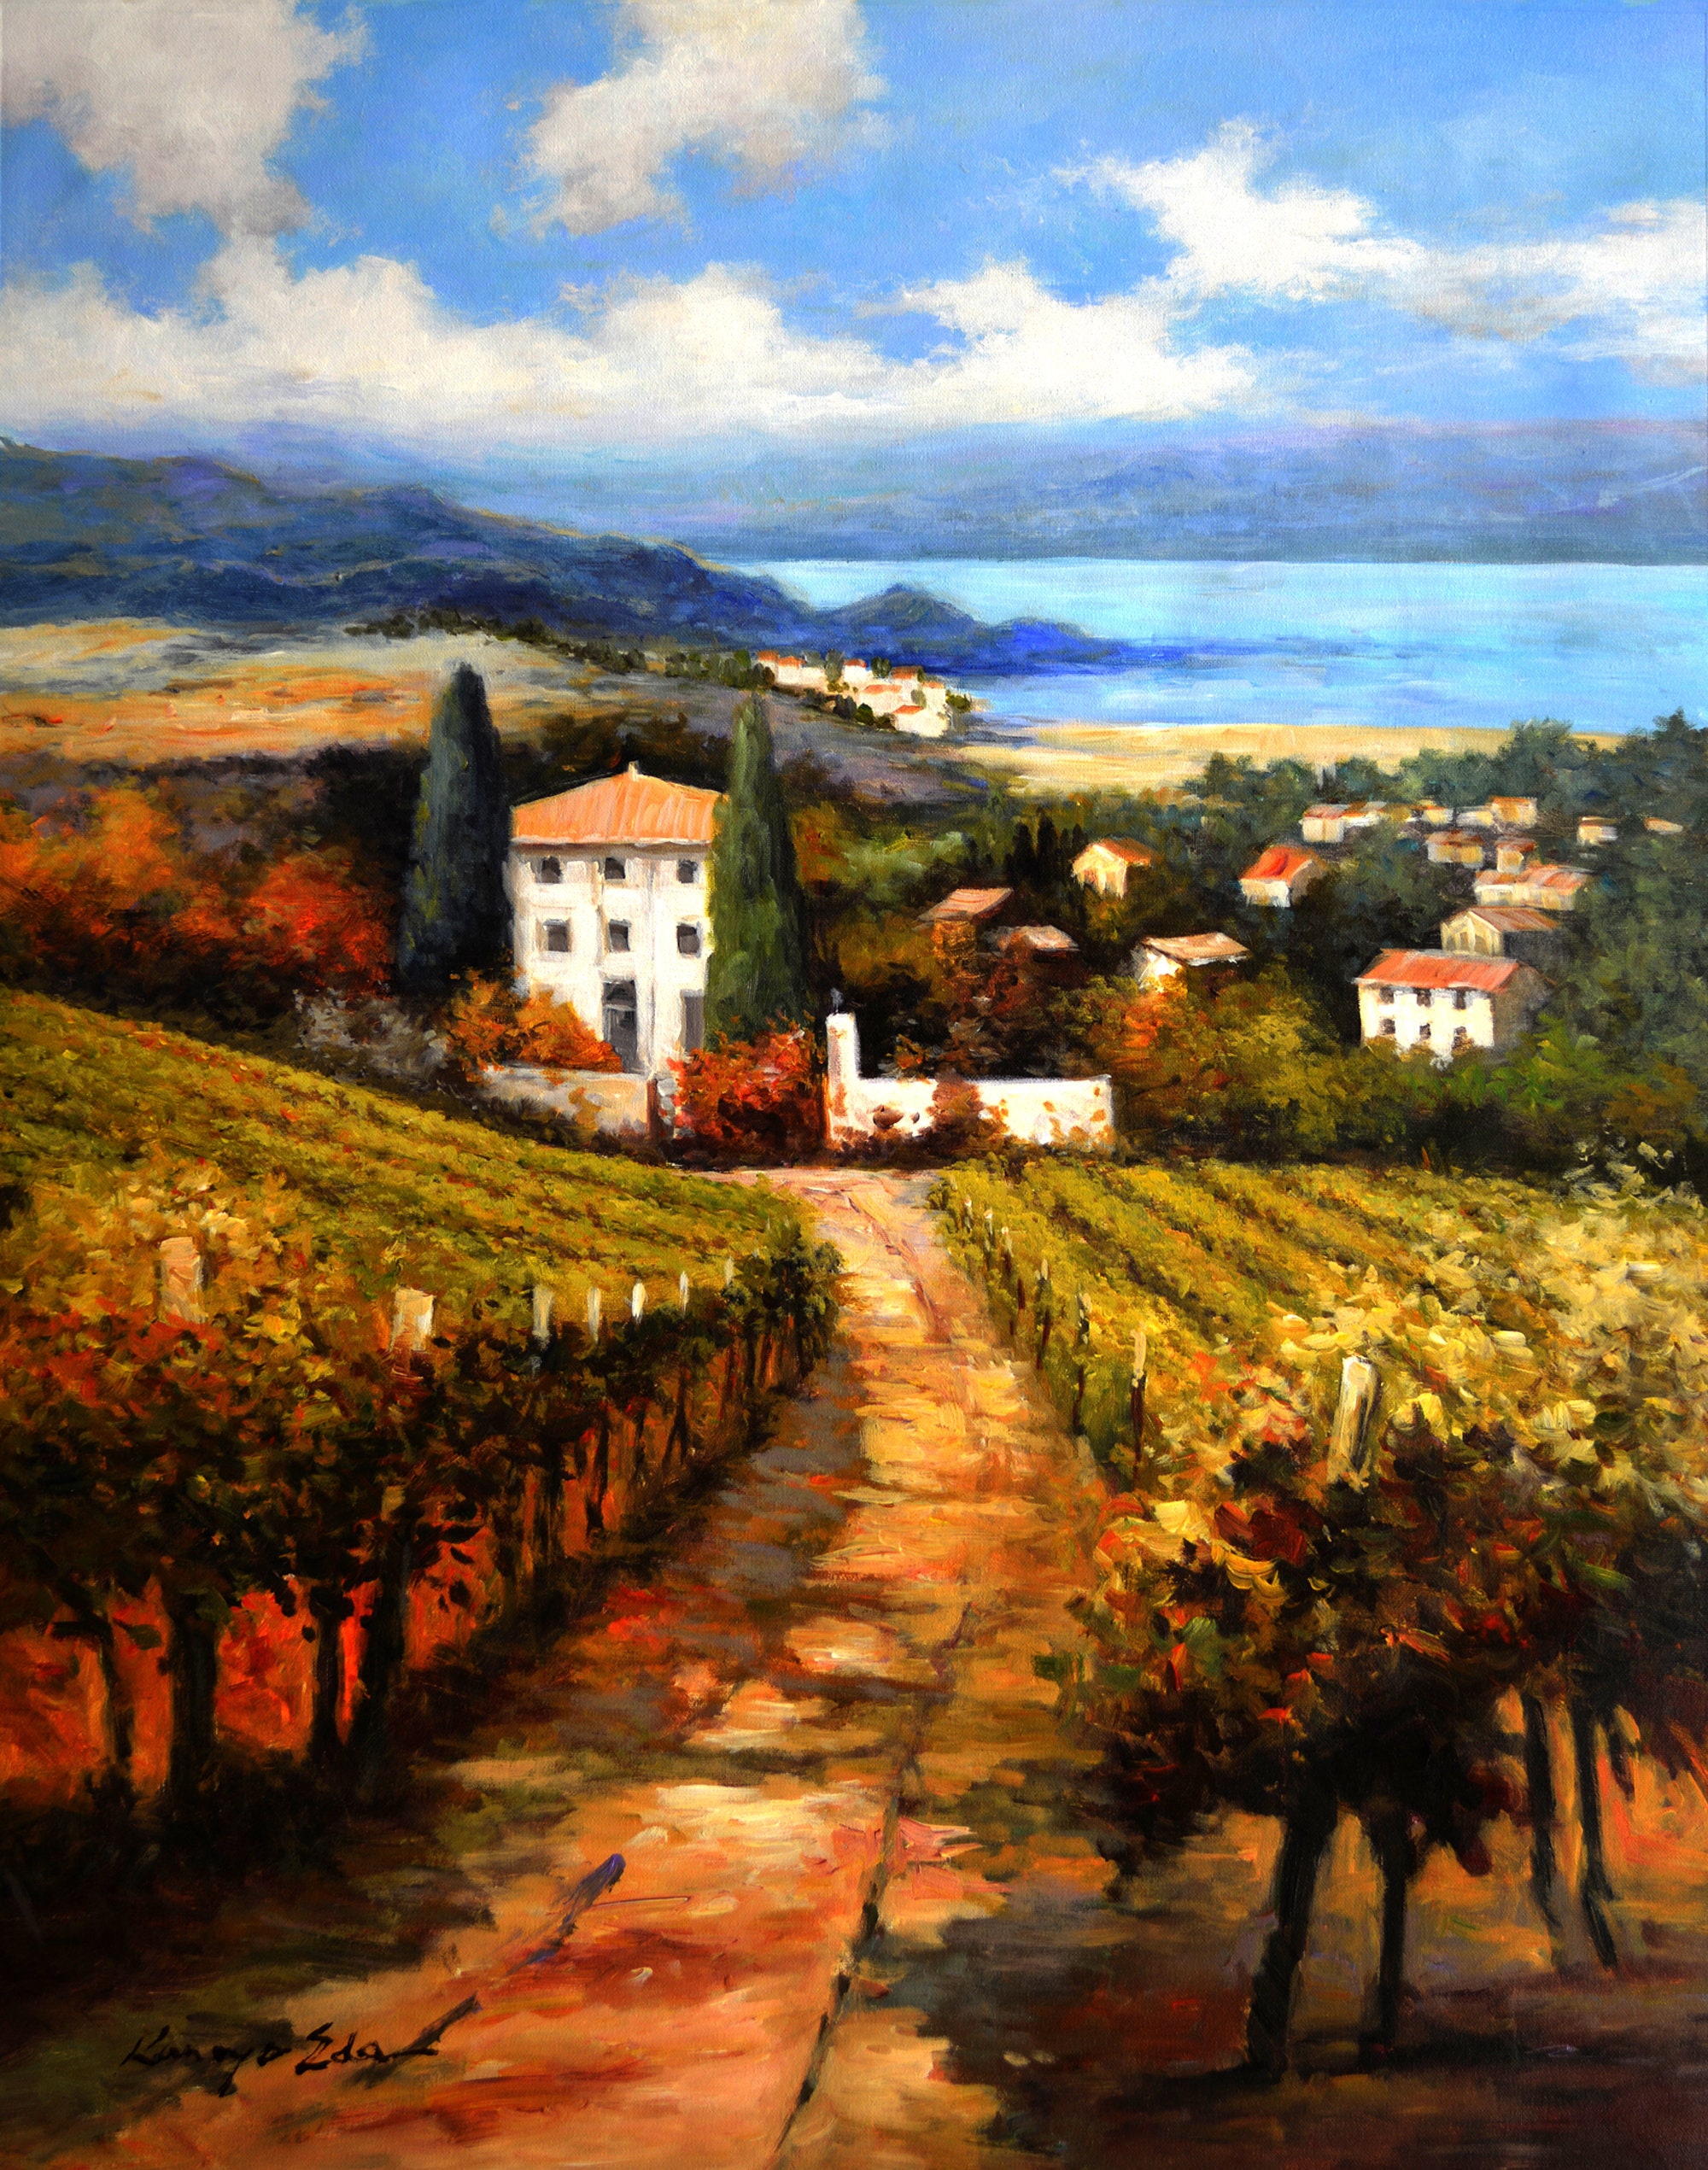 “Summer in Tuscany” Acrylic Painting on 16x20 Canvas